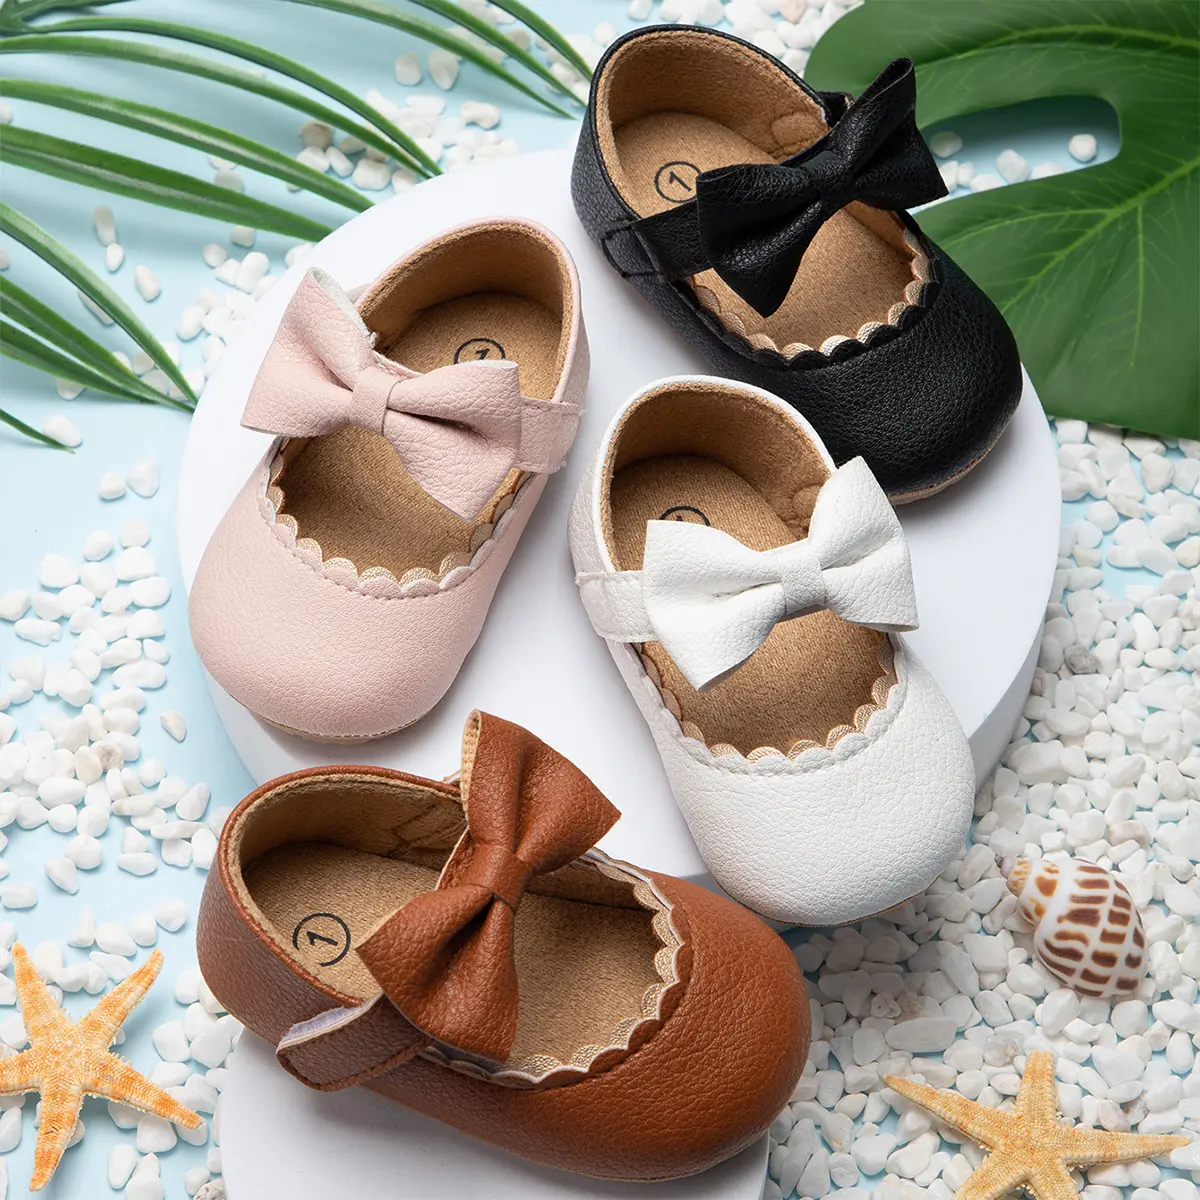 Baby Casual Shoes Infant Toddler Girls Bowknot Princess Shoes Non-slip Rubber Soft-Sole Flat PU First Walker Newborn Mary Janes